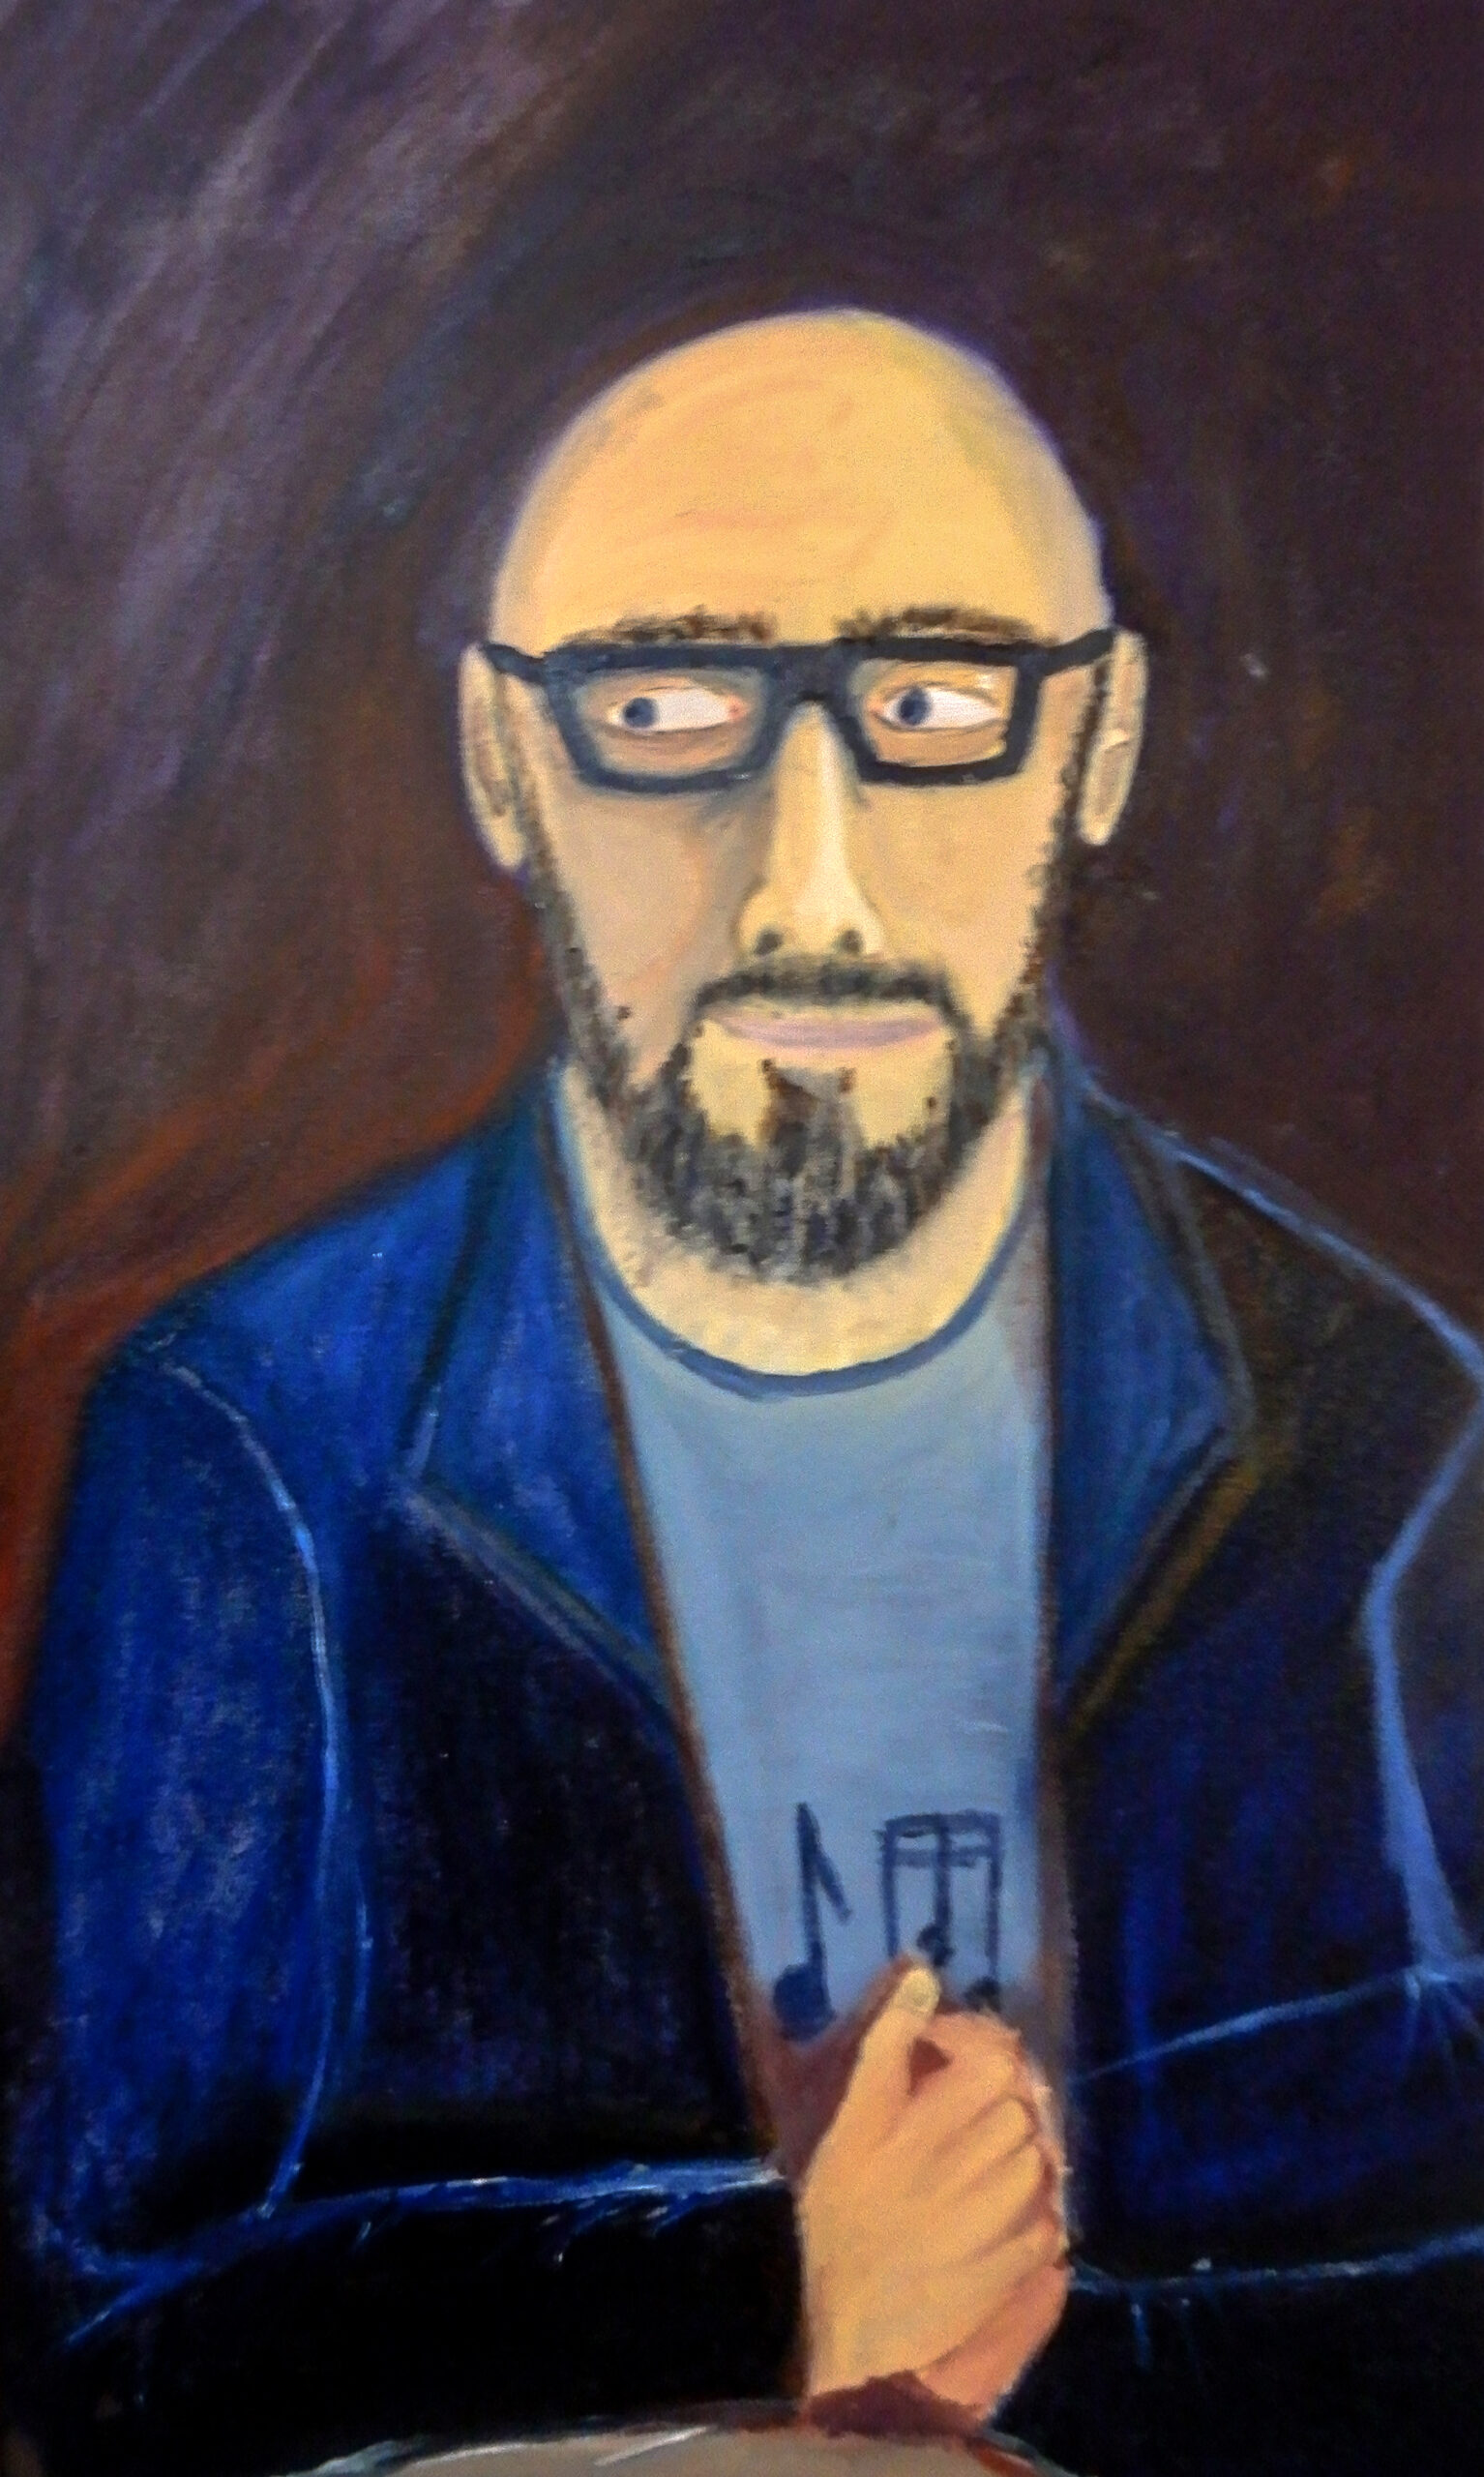 A painting of a person's portrait. The person is wearing glasses and a blue jacket.